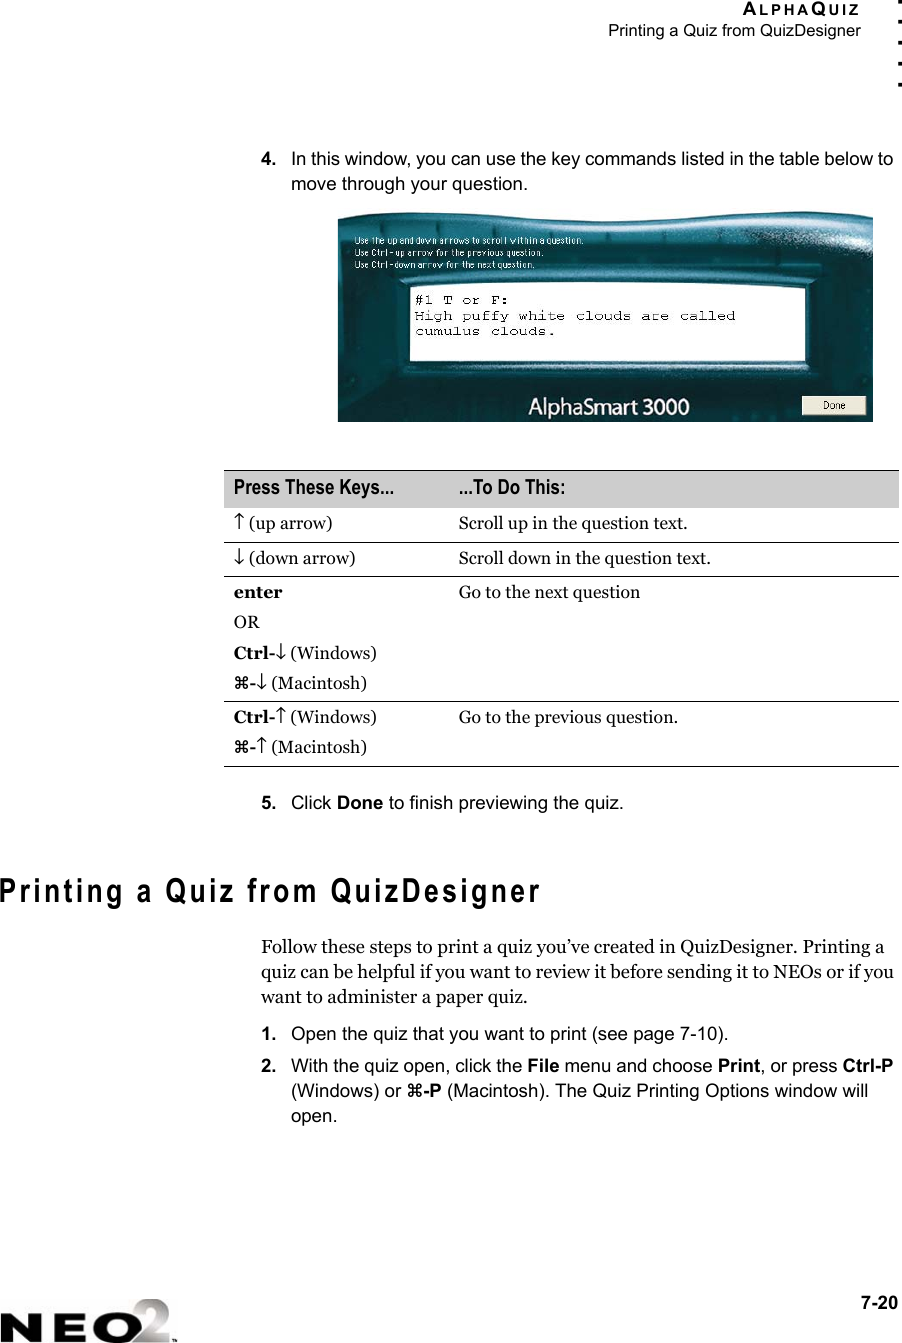 ALPHAQUIZPrinting a Quiz from QuizDesigner7-20. . . . .4. In this window, you can use the key commands listed in the table below to move through your question.5. Click Done to finish previewing the quiz.Printing a Quiz from QuizDesignerFollow these steps to print a quiz you’ve created in QuizDesigner. Printing a quiz can be helpful if you want to review it before sending it to NEOs or if you want to administer a paper quiz.1. Open the quiz that you want to print (see page 7-10).2. With the quiz open, click the File menu and choose Print, or press Ctrl-P (Windows) or z-P (Macintosh). The Quiz Printing Options window will open.Press These Keys... ...To Do This:↑ (up arrow) Scroll up in the question text.↓ (down arrow) Scroll down in the question text.enter ORCtrl-↓ (Windows)z-↓ (Macintosh)Go to the next questionCtrl-↑ (Windows)z-↑ (Macintosh)Go to the previous question.